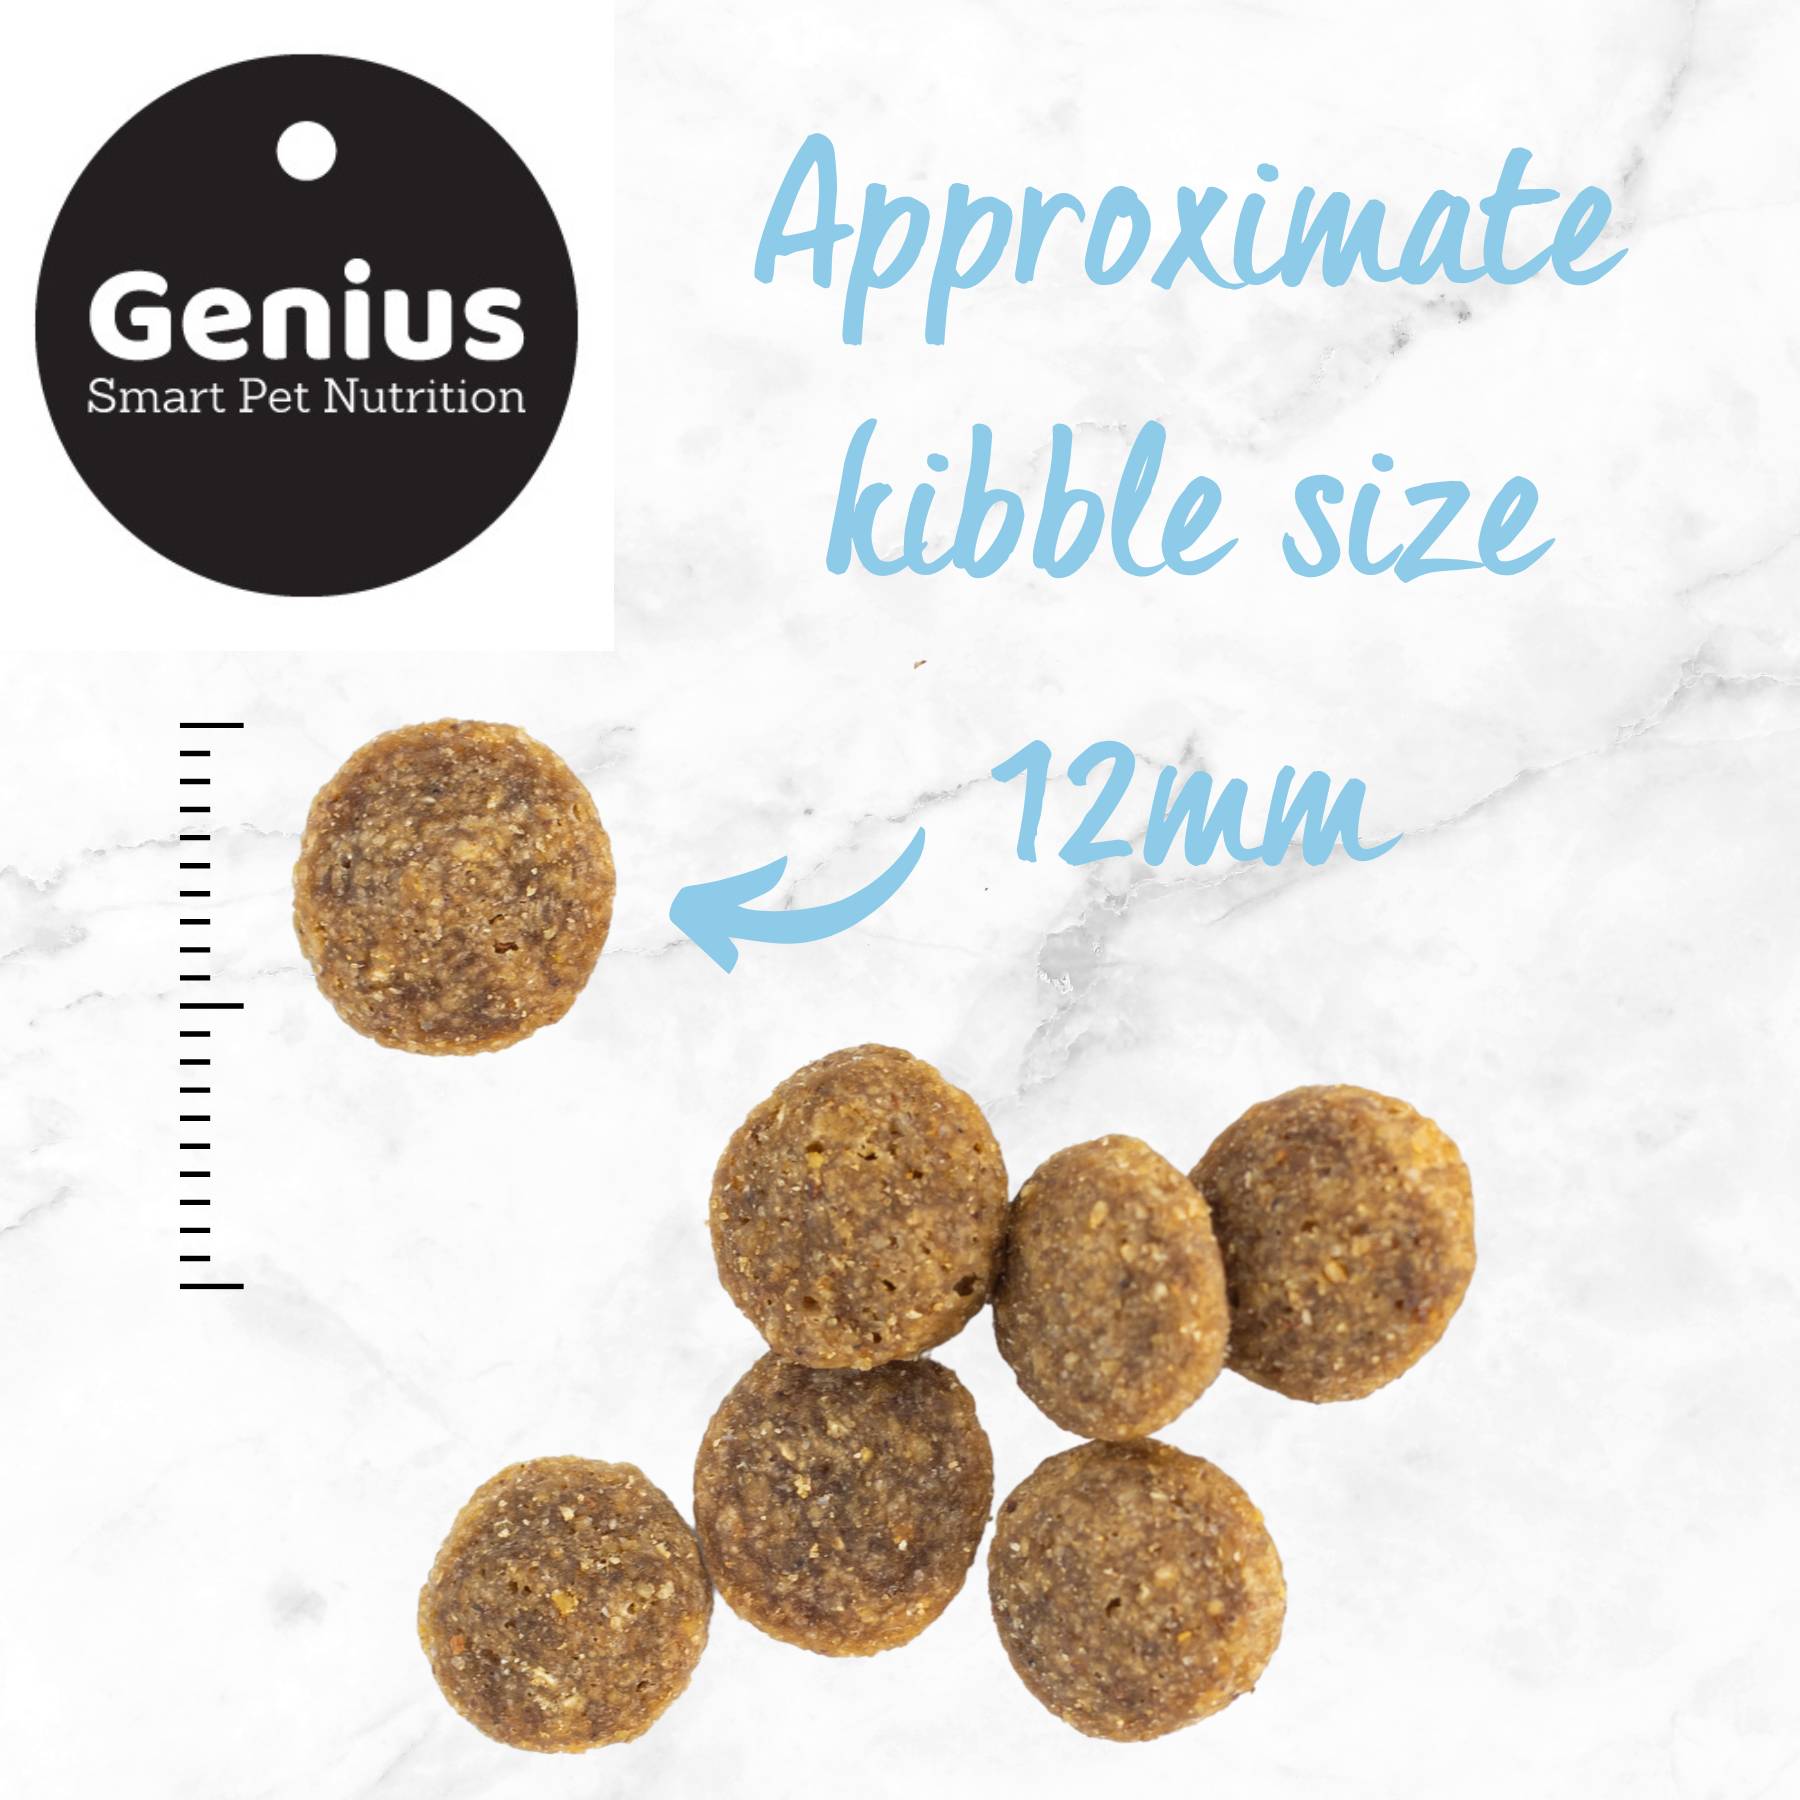 Image of Genius Pet Food Ocean Fish flavour dog kibble with ruler and size